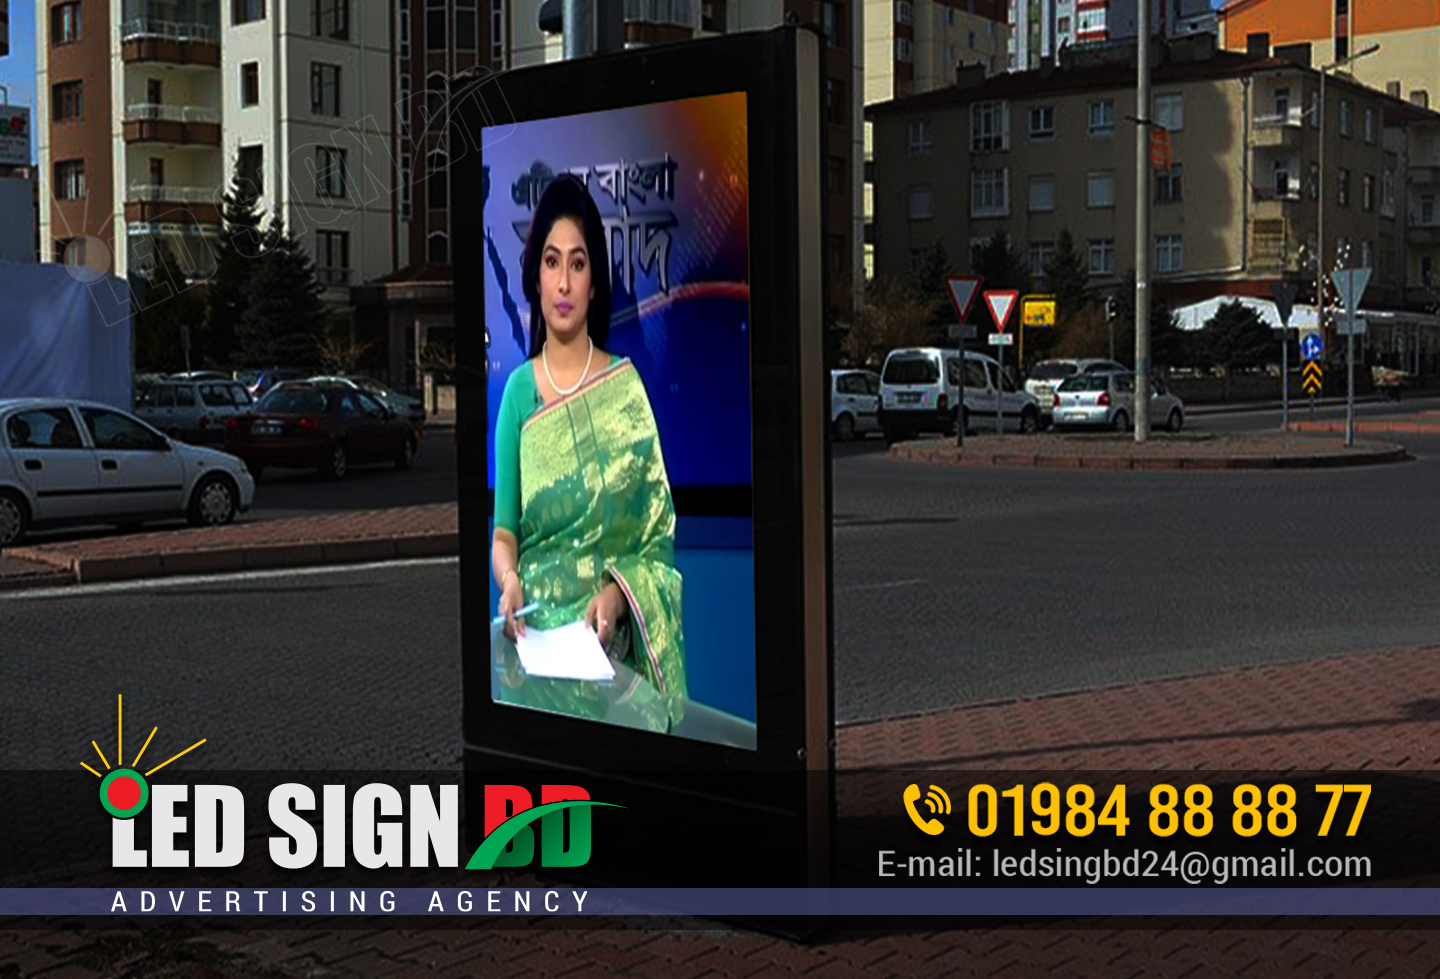 P6 Outdoor LED Display Video Wall price in Dhaka Bangladesh, 56 Inches Digital Standee, Input Voltage: 240 V, Resolution: 1920 X 1080 Pixels, Advertising LED Display Screen P8 Outdoor in Dhaka Bangladesh, P4 P5 P6 outdoor street lighting pole vertical digital signage signs LED advertising screen bd, Outdoor Scrolling LED Display Board